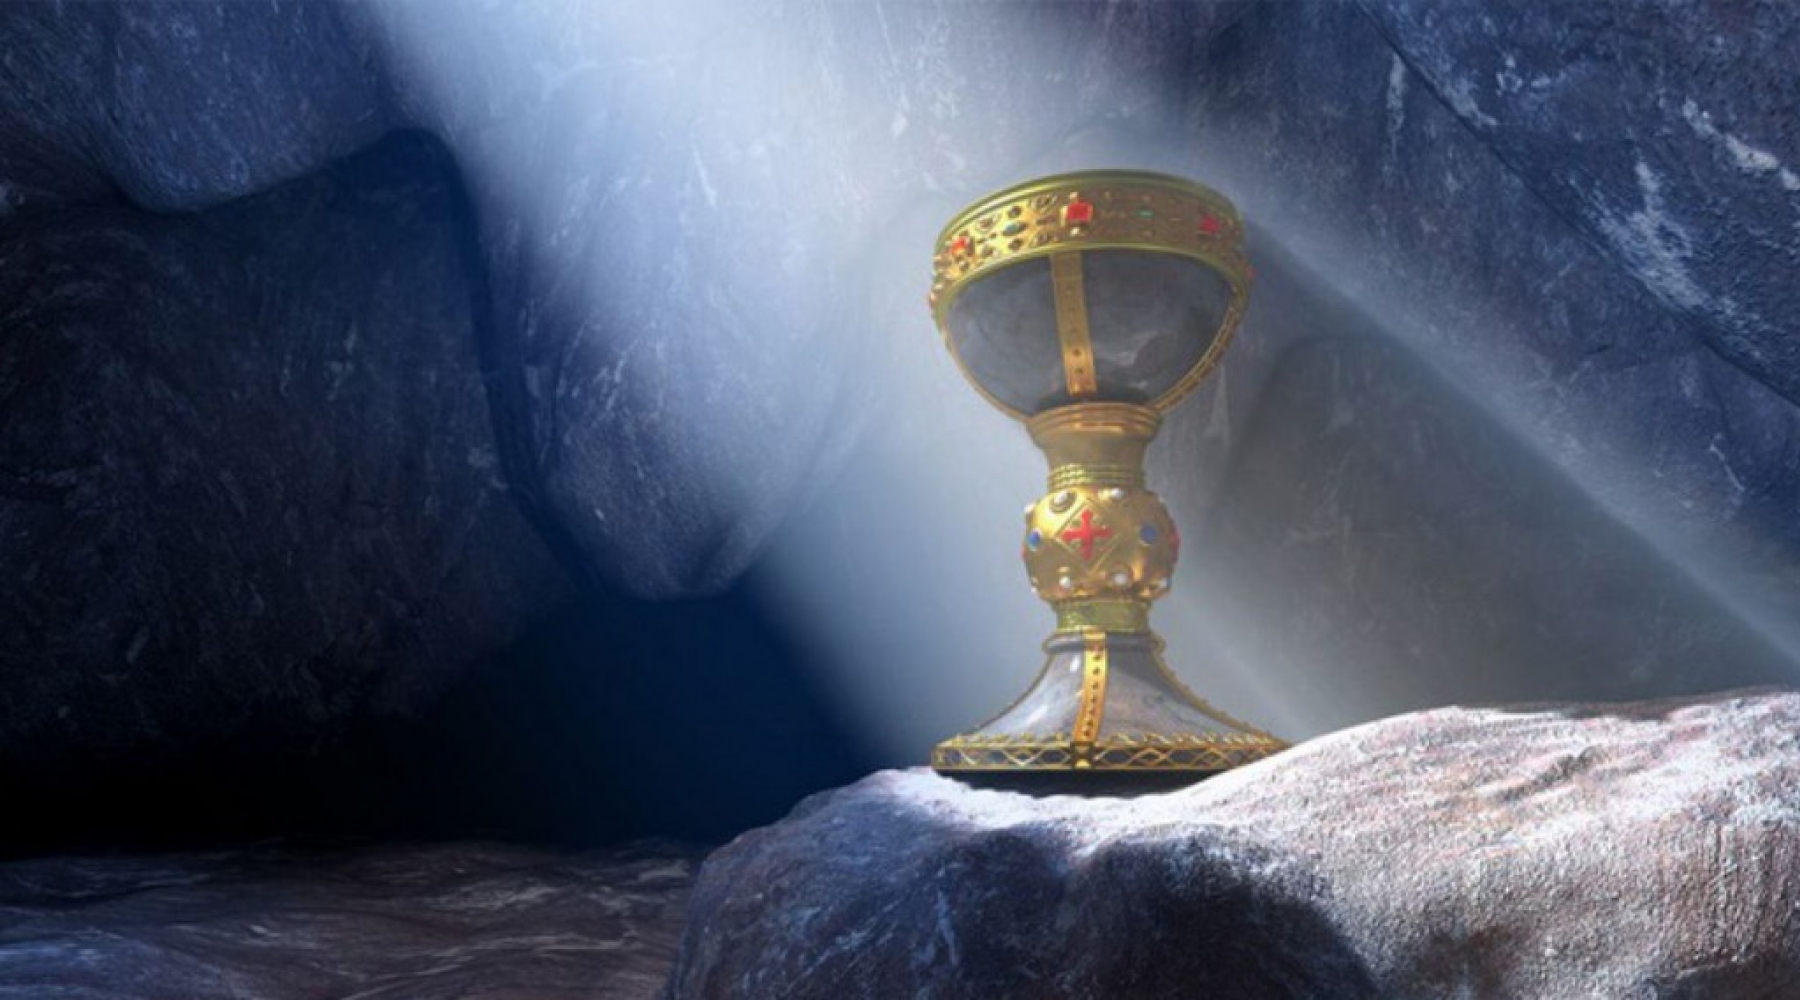 The Holy Grail? Hidden by a dynasty of heretics in Lake Garda